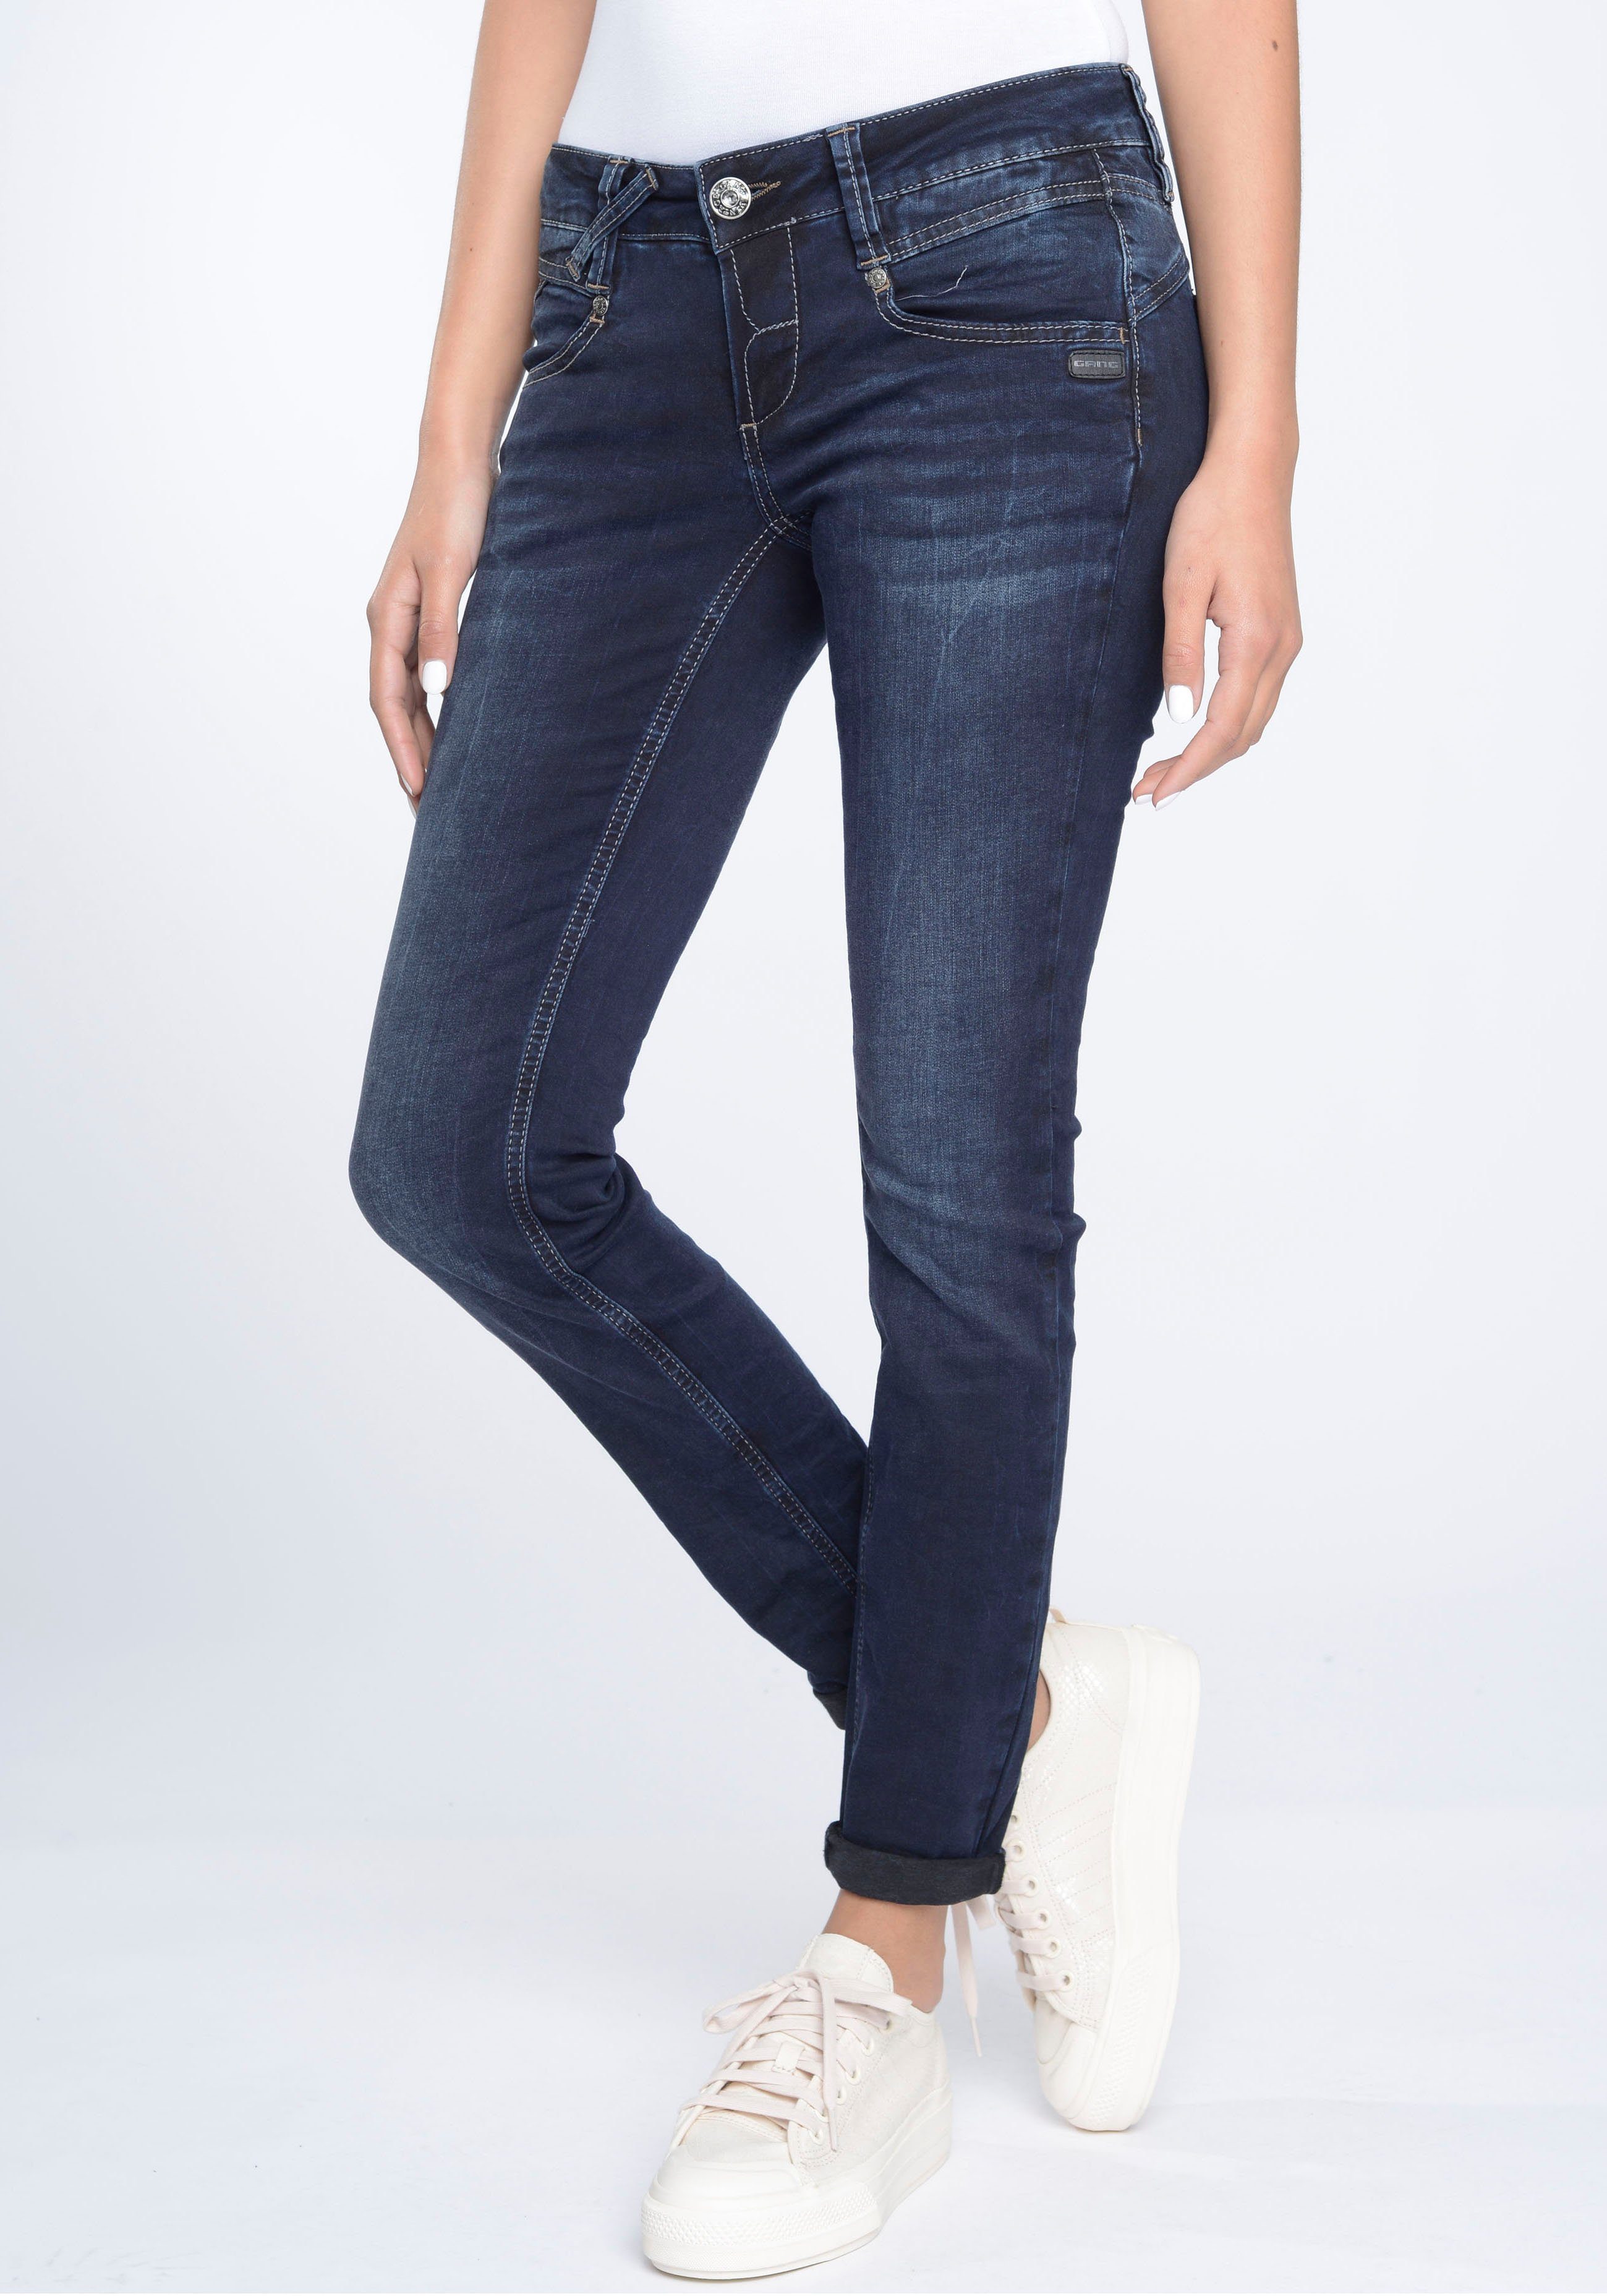 GANG Skinny-fit-Jeans 94Nena in authenischer used dark Used-Waschung